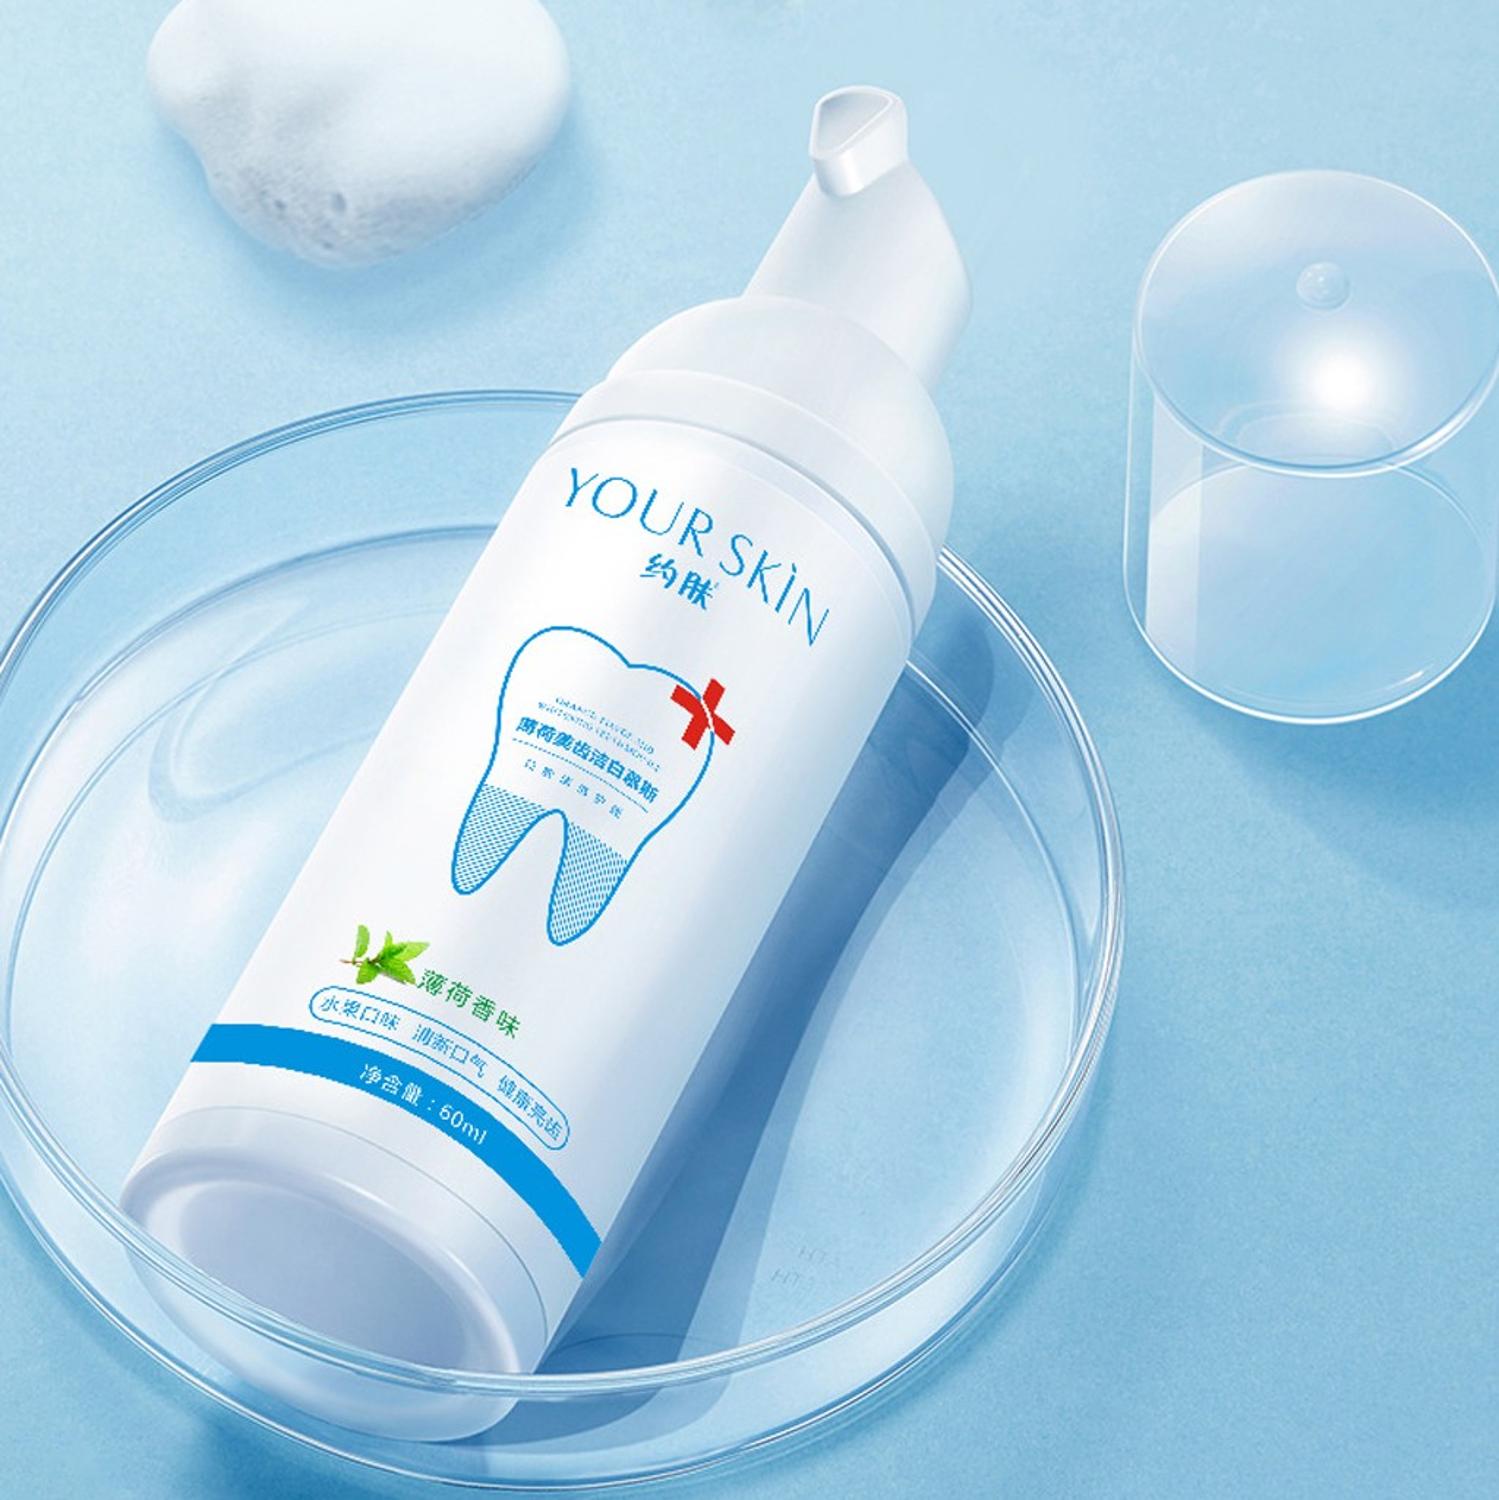 60ML Tooth Whitening Cleaning Toothpaste Foam for Natural Mouthwash Teeth Oral Hygiene Teeth Toothpaste Dental Care